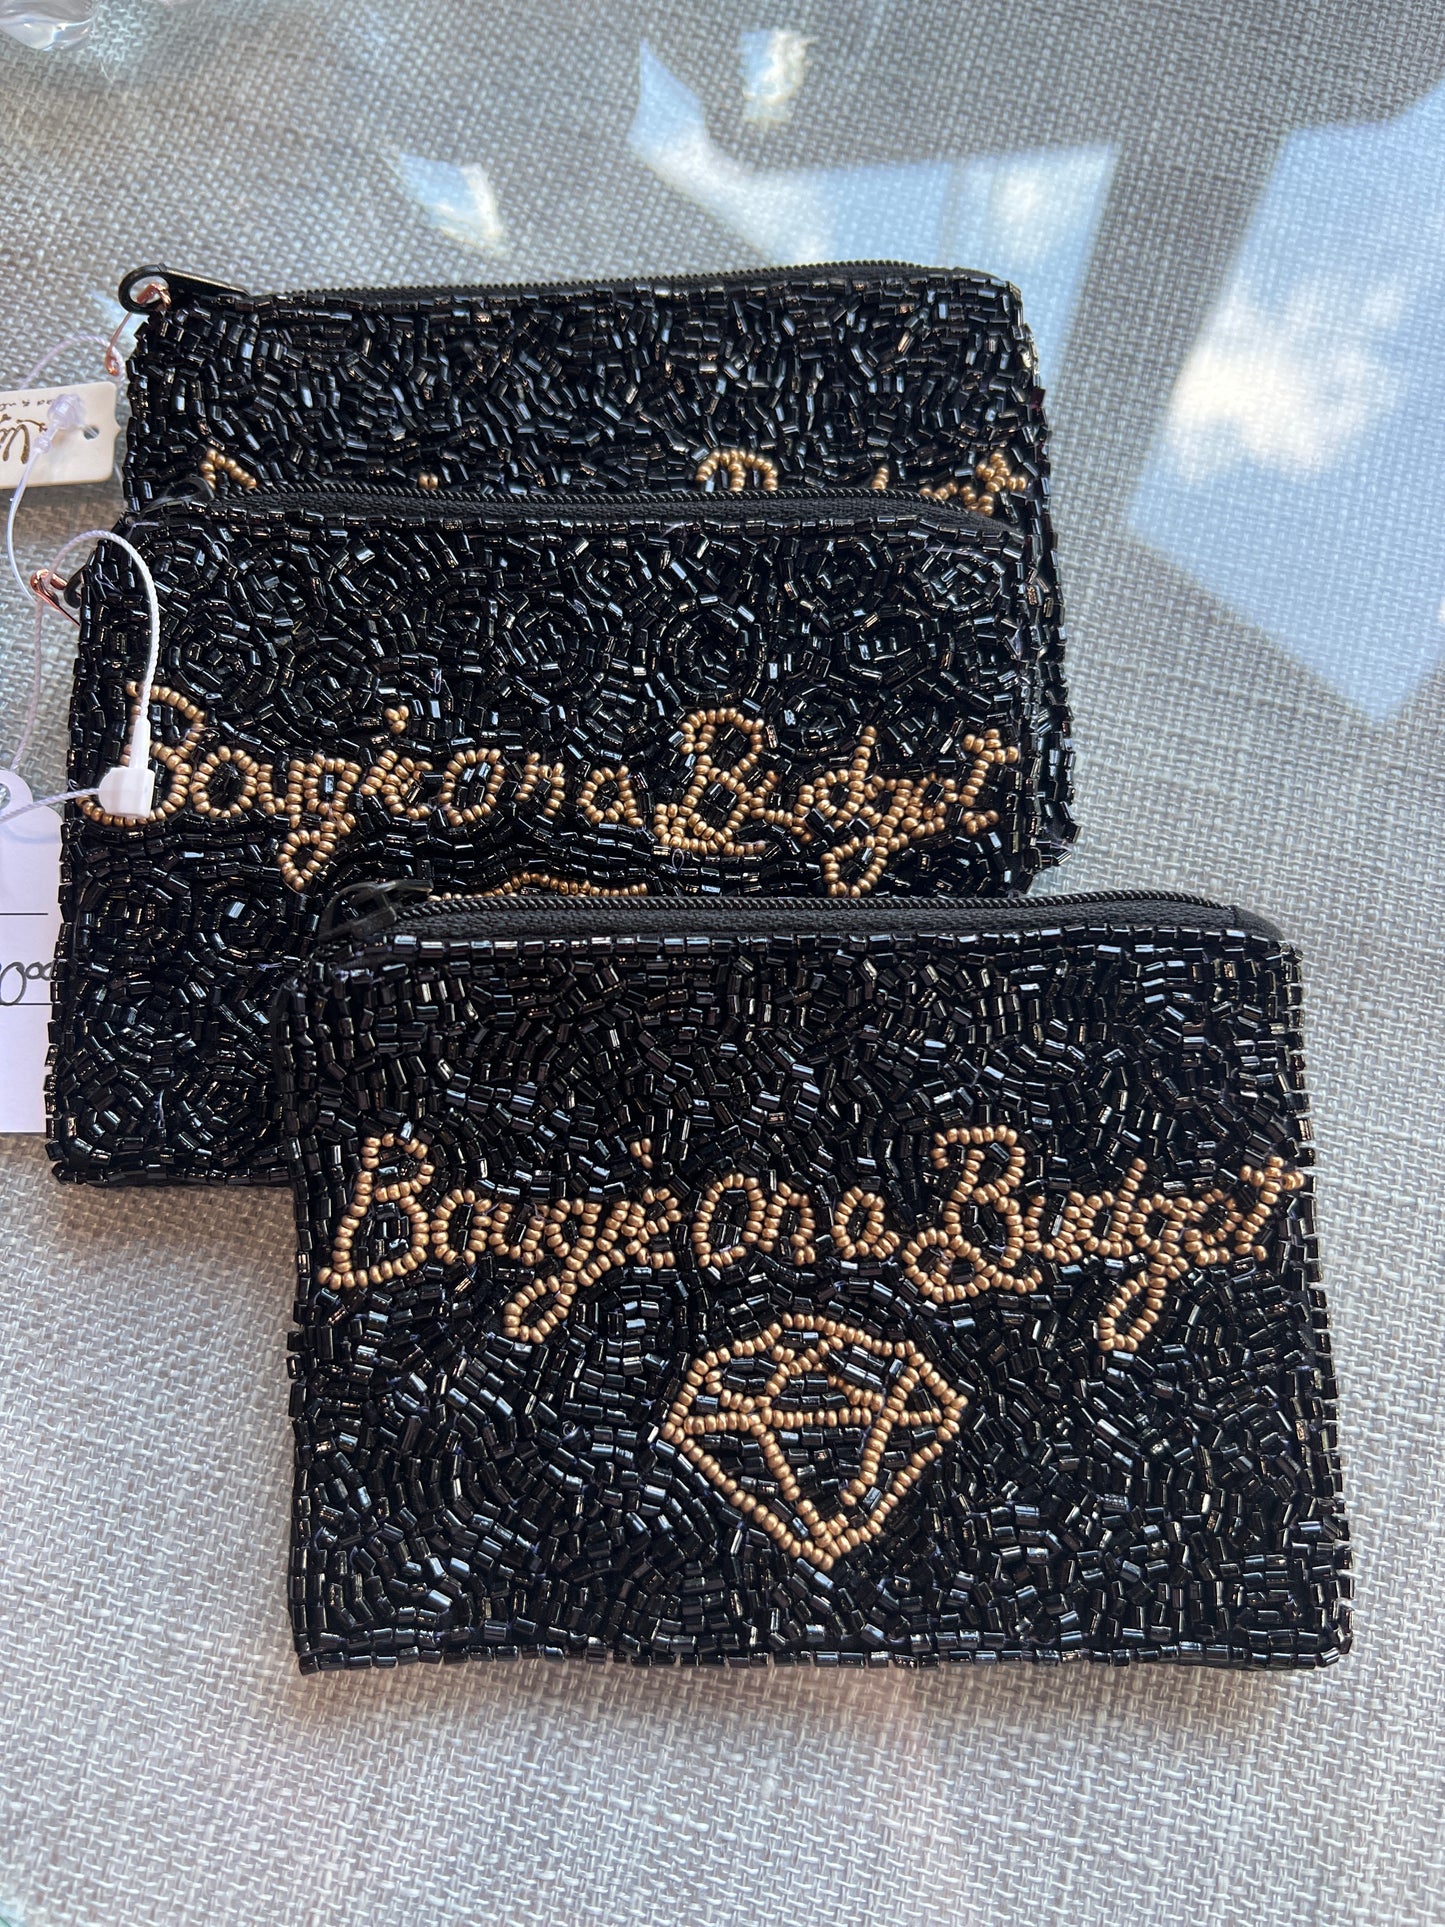 "Bougie on a Budget" Beaded Zipper Pouch